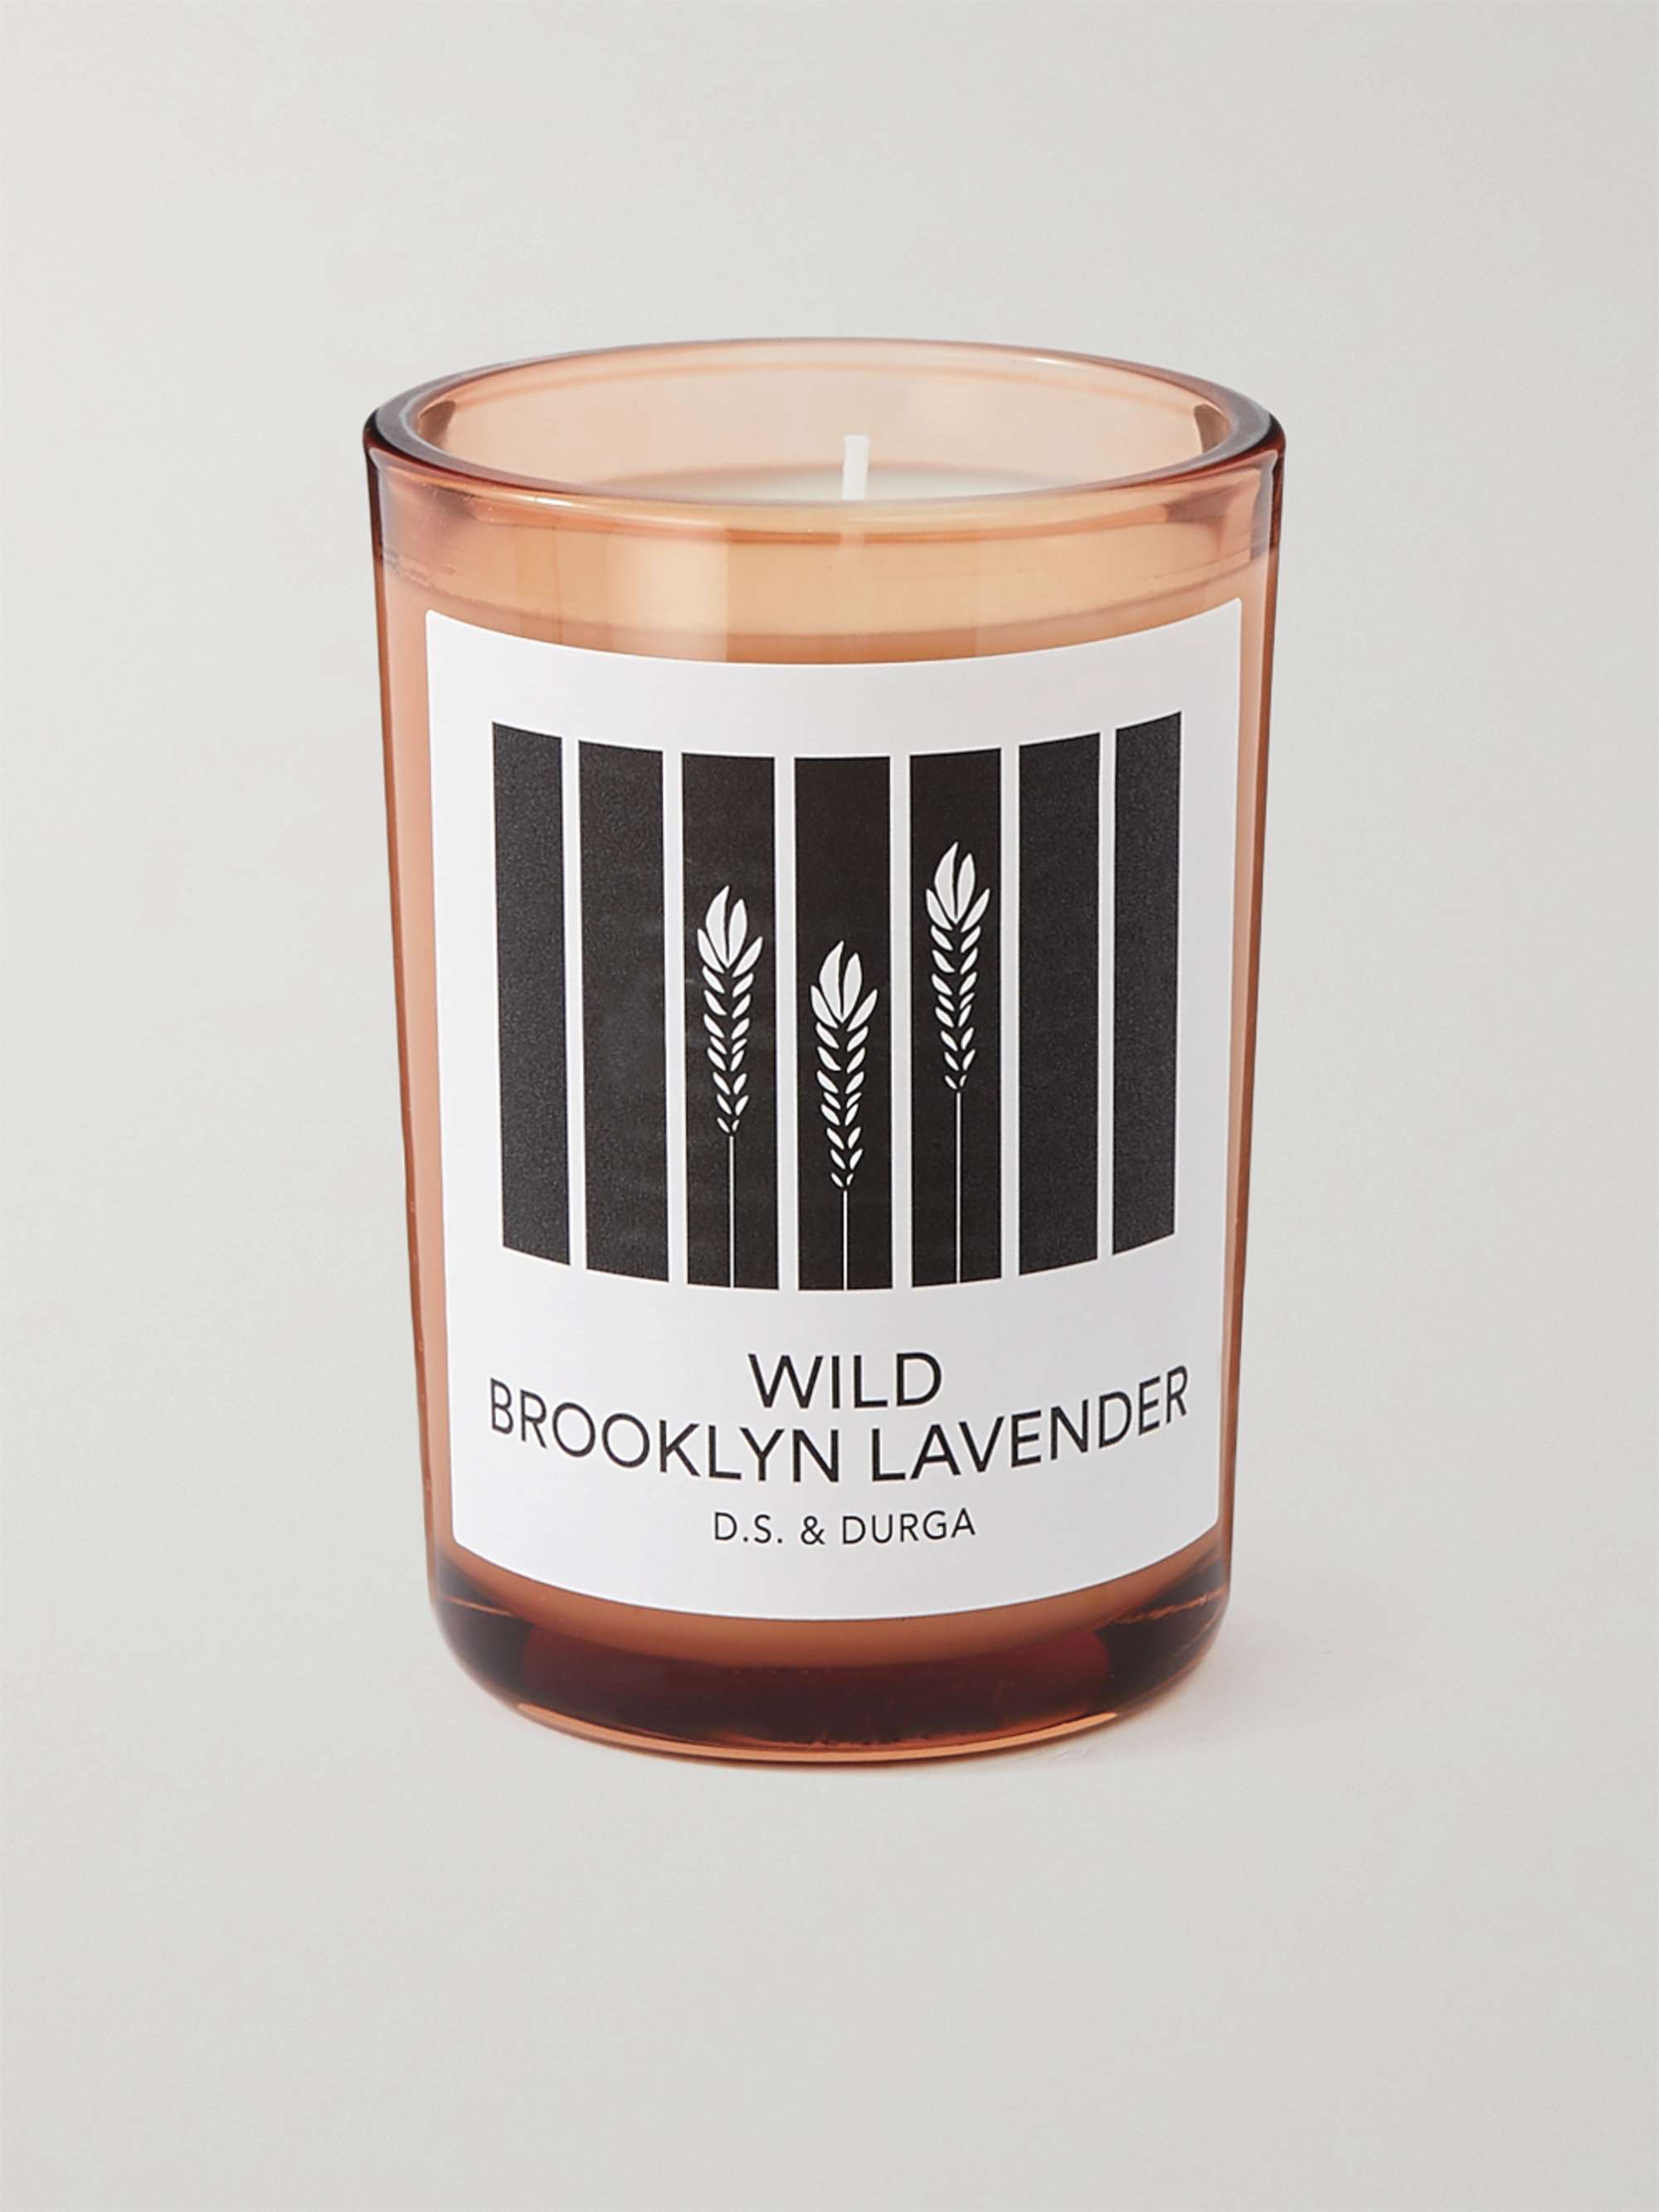 D.S. & DURGA Wild Brooklyn Lavender Scented Candle, 200g